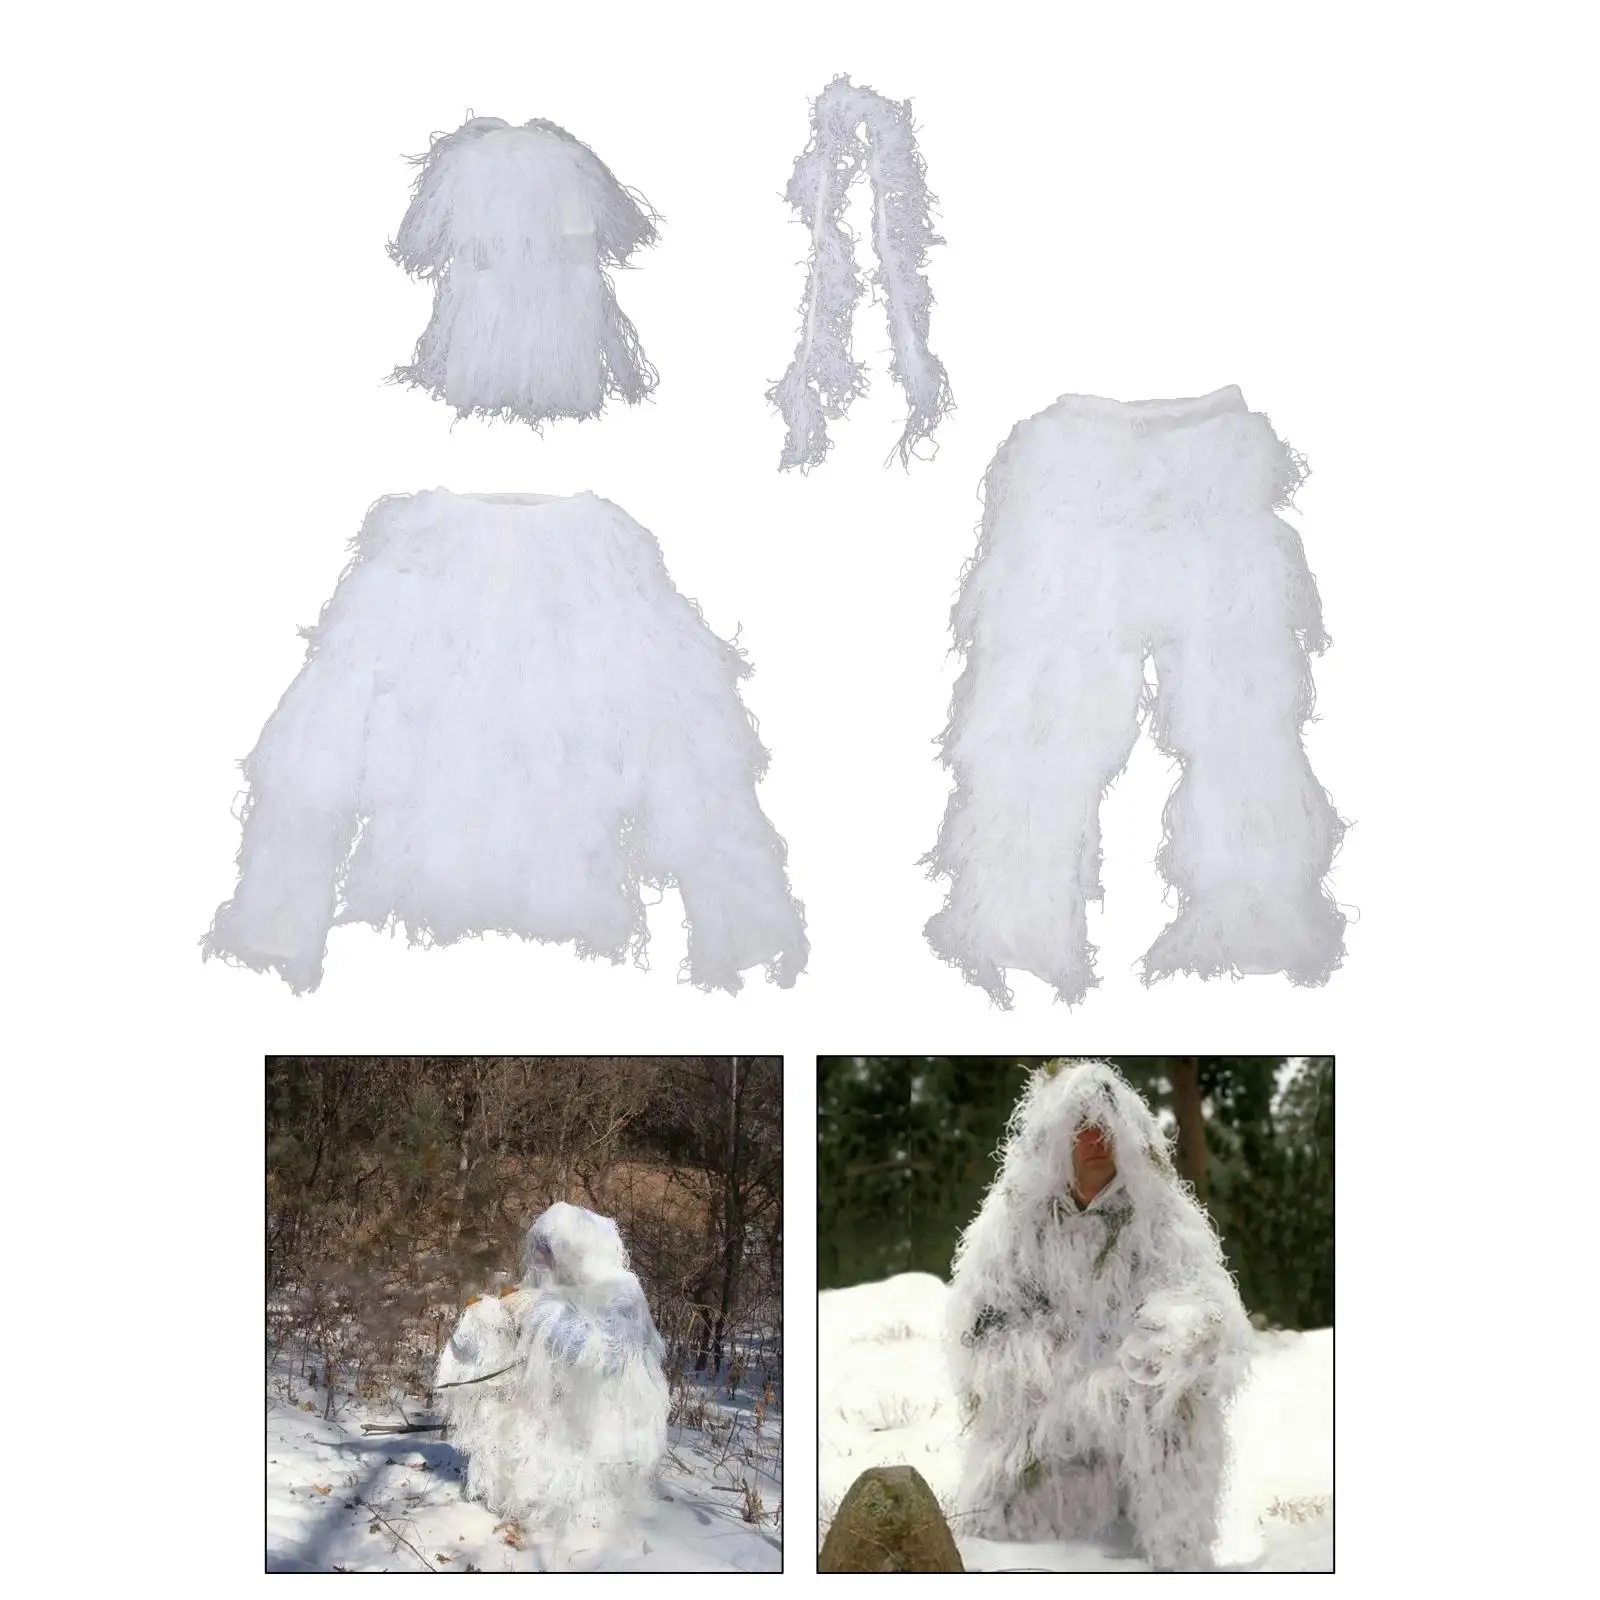 Snow Camo Winter Masking Suit Camouflage Clothing Jacket, Pants Hood Head Full Cover Wildlife Photography Party Clothes Set